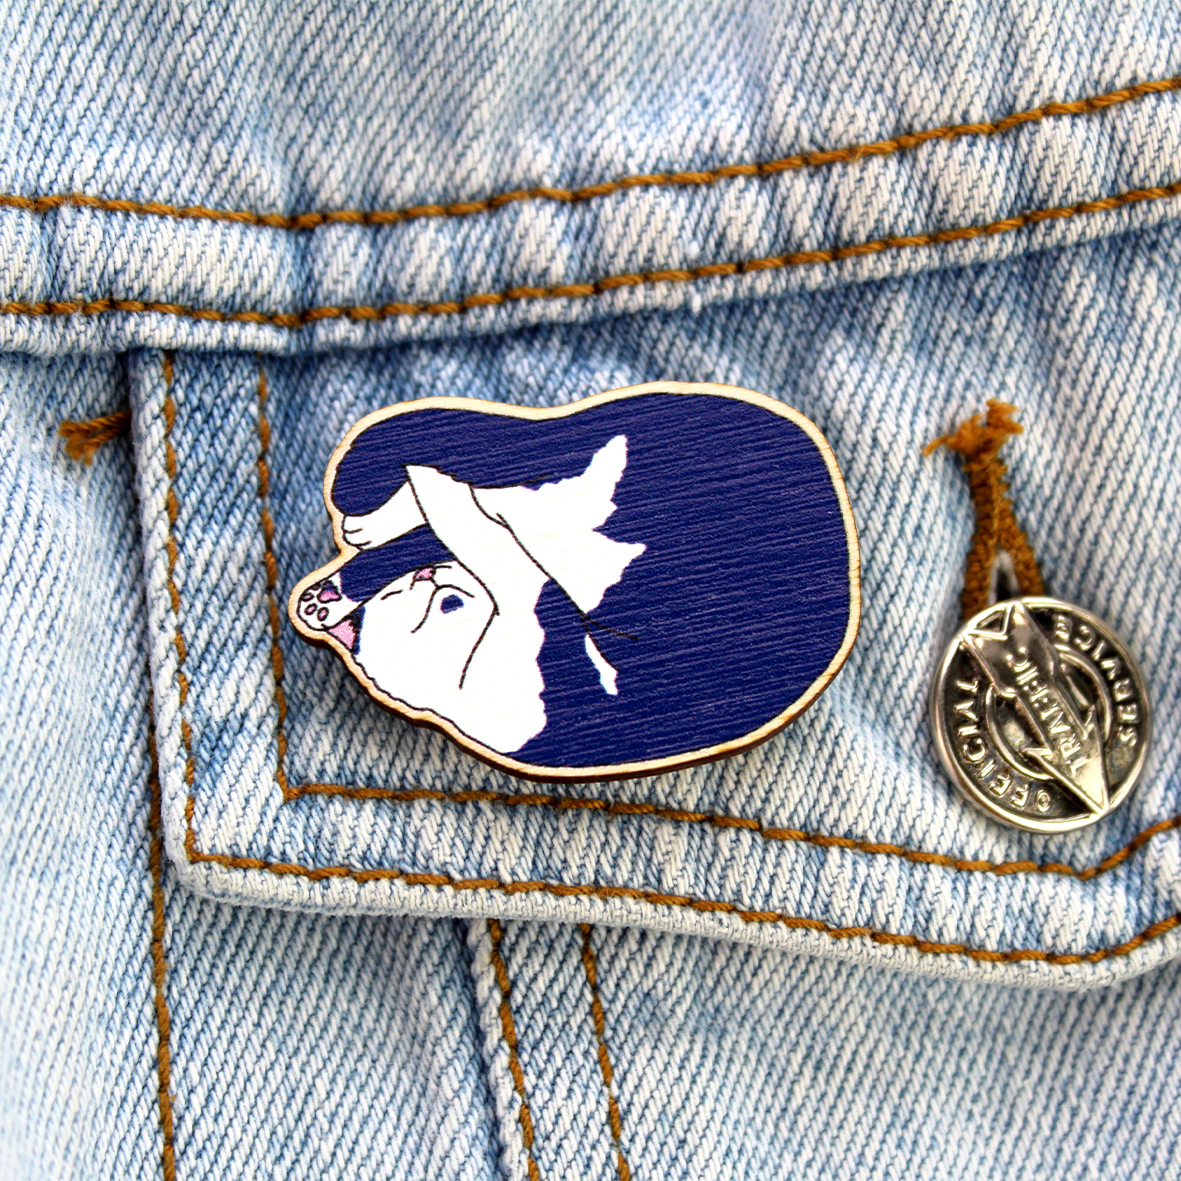 the wooden cat pin basge featuring a sleeping cute cat is pictured attached to a denim jacket pocket.